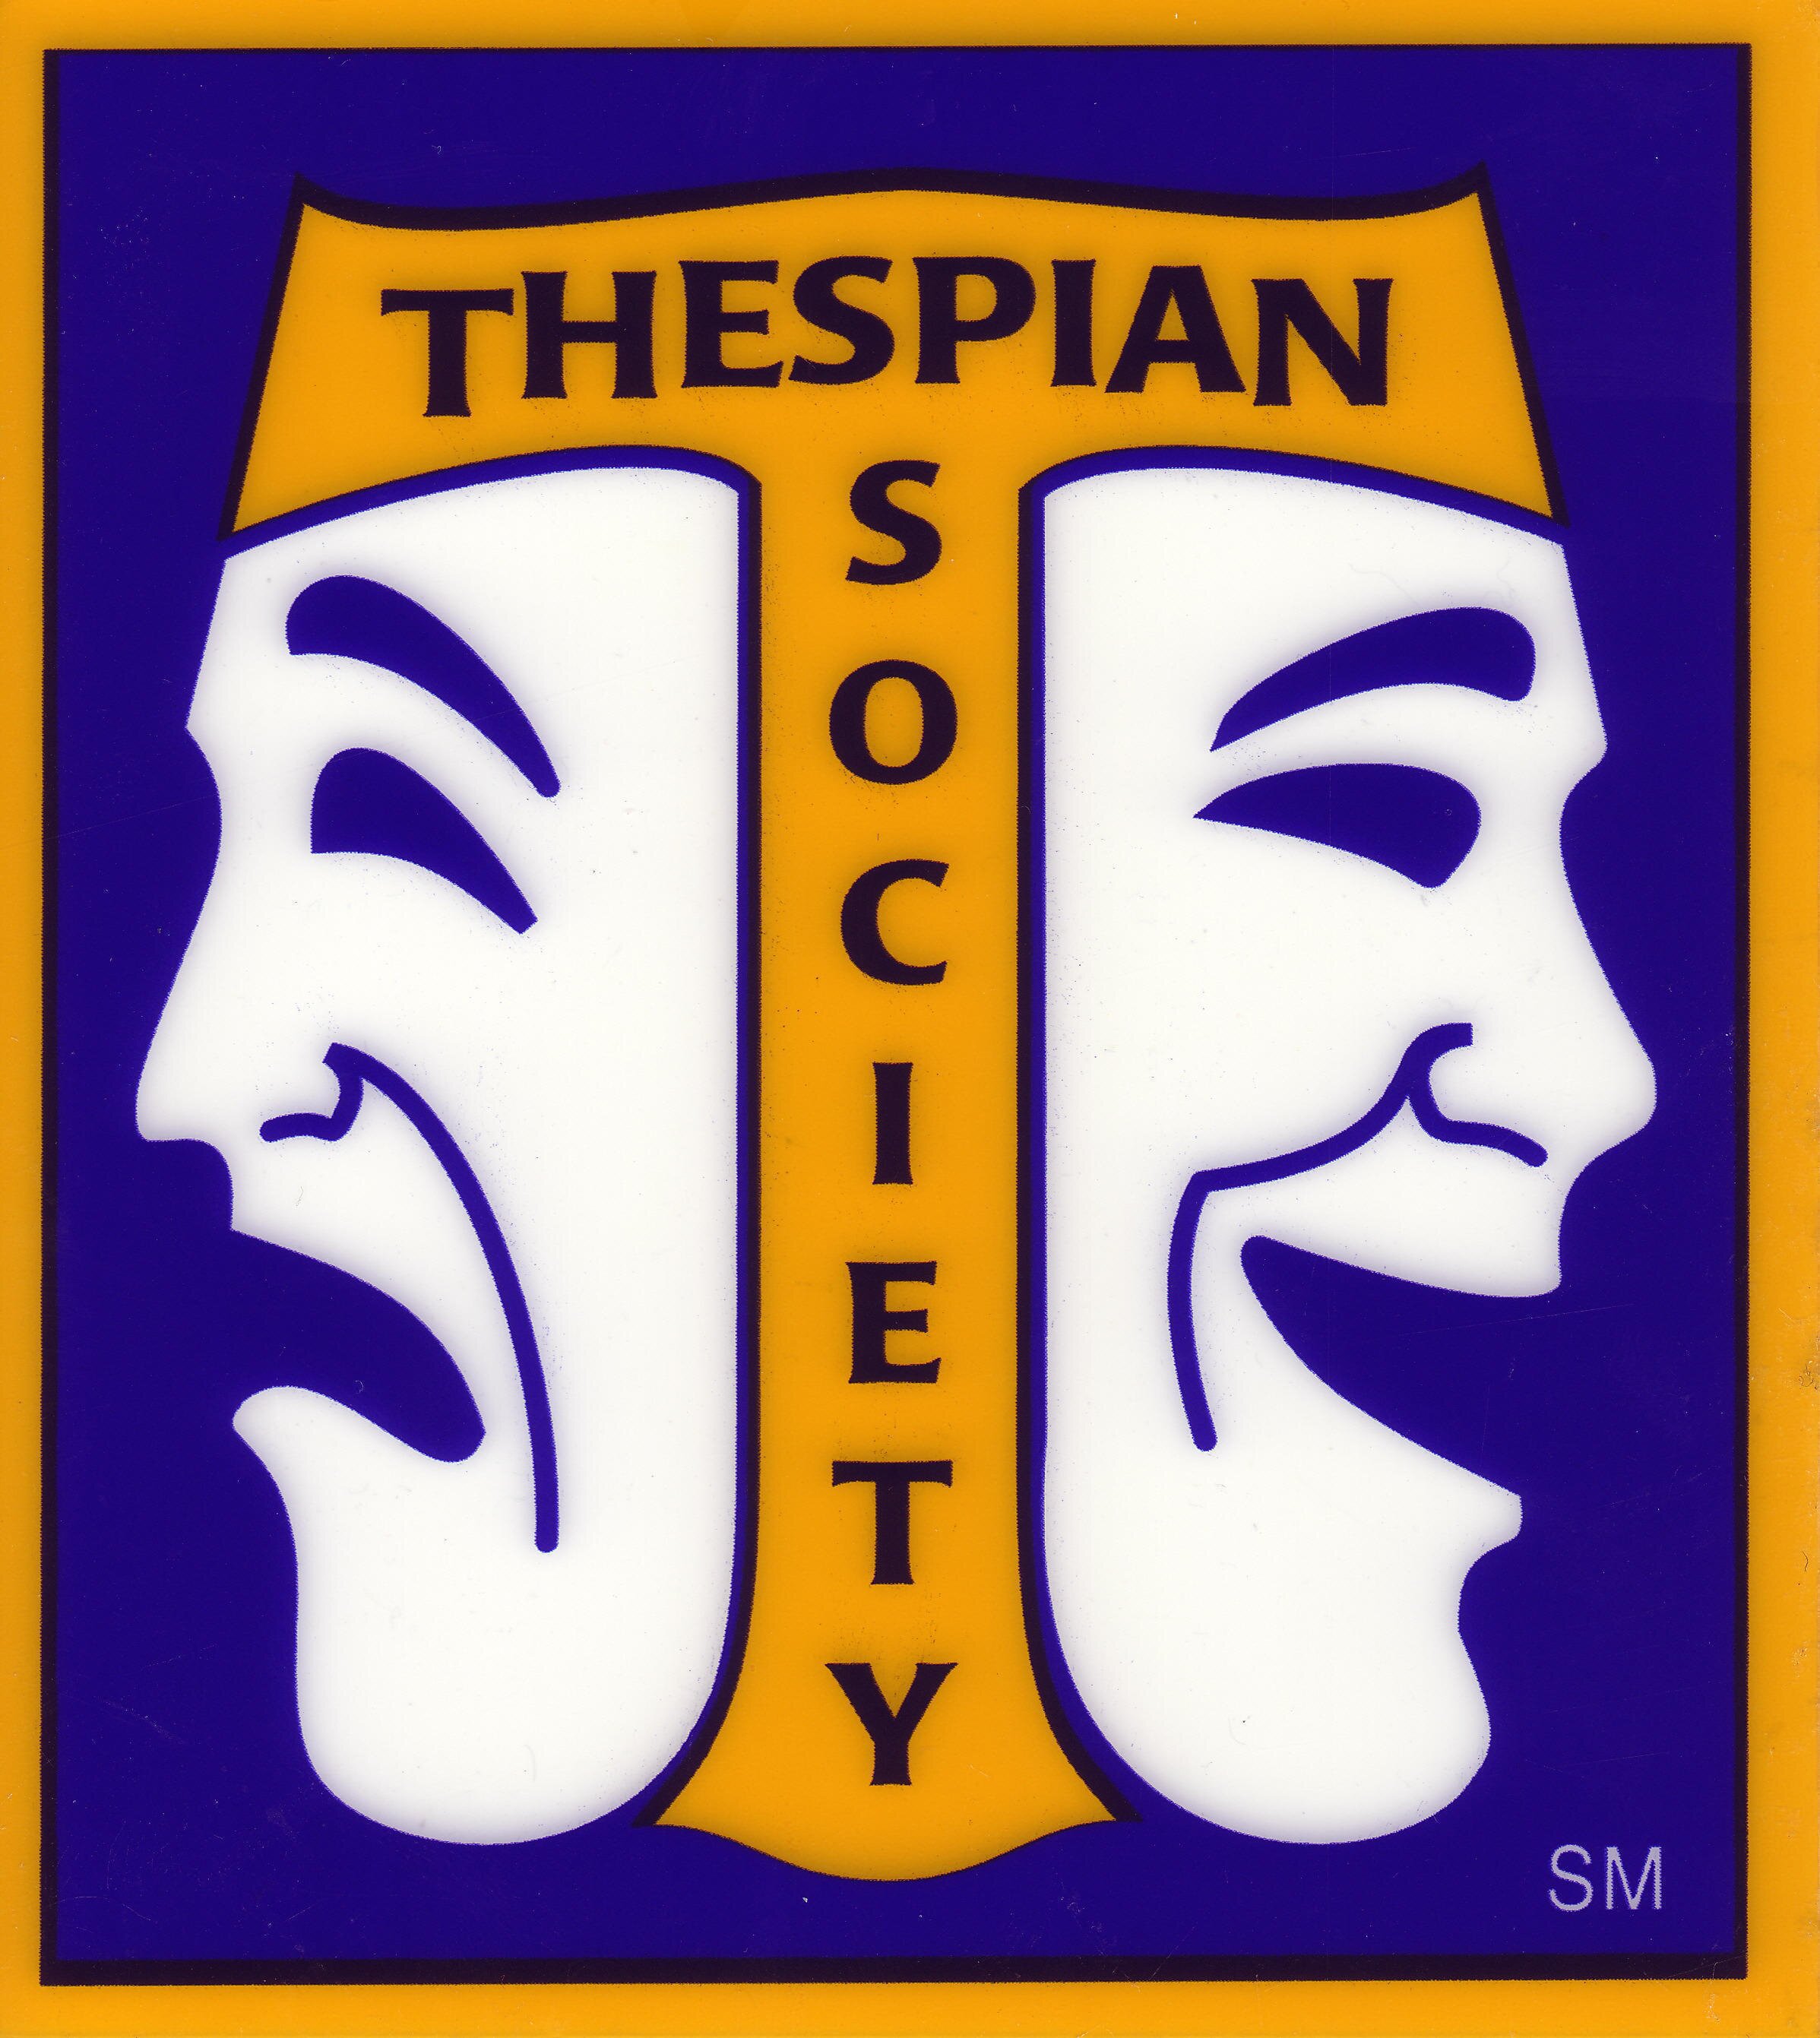 The official twitter page of the New Hampshire Thespian Festival!